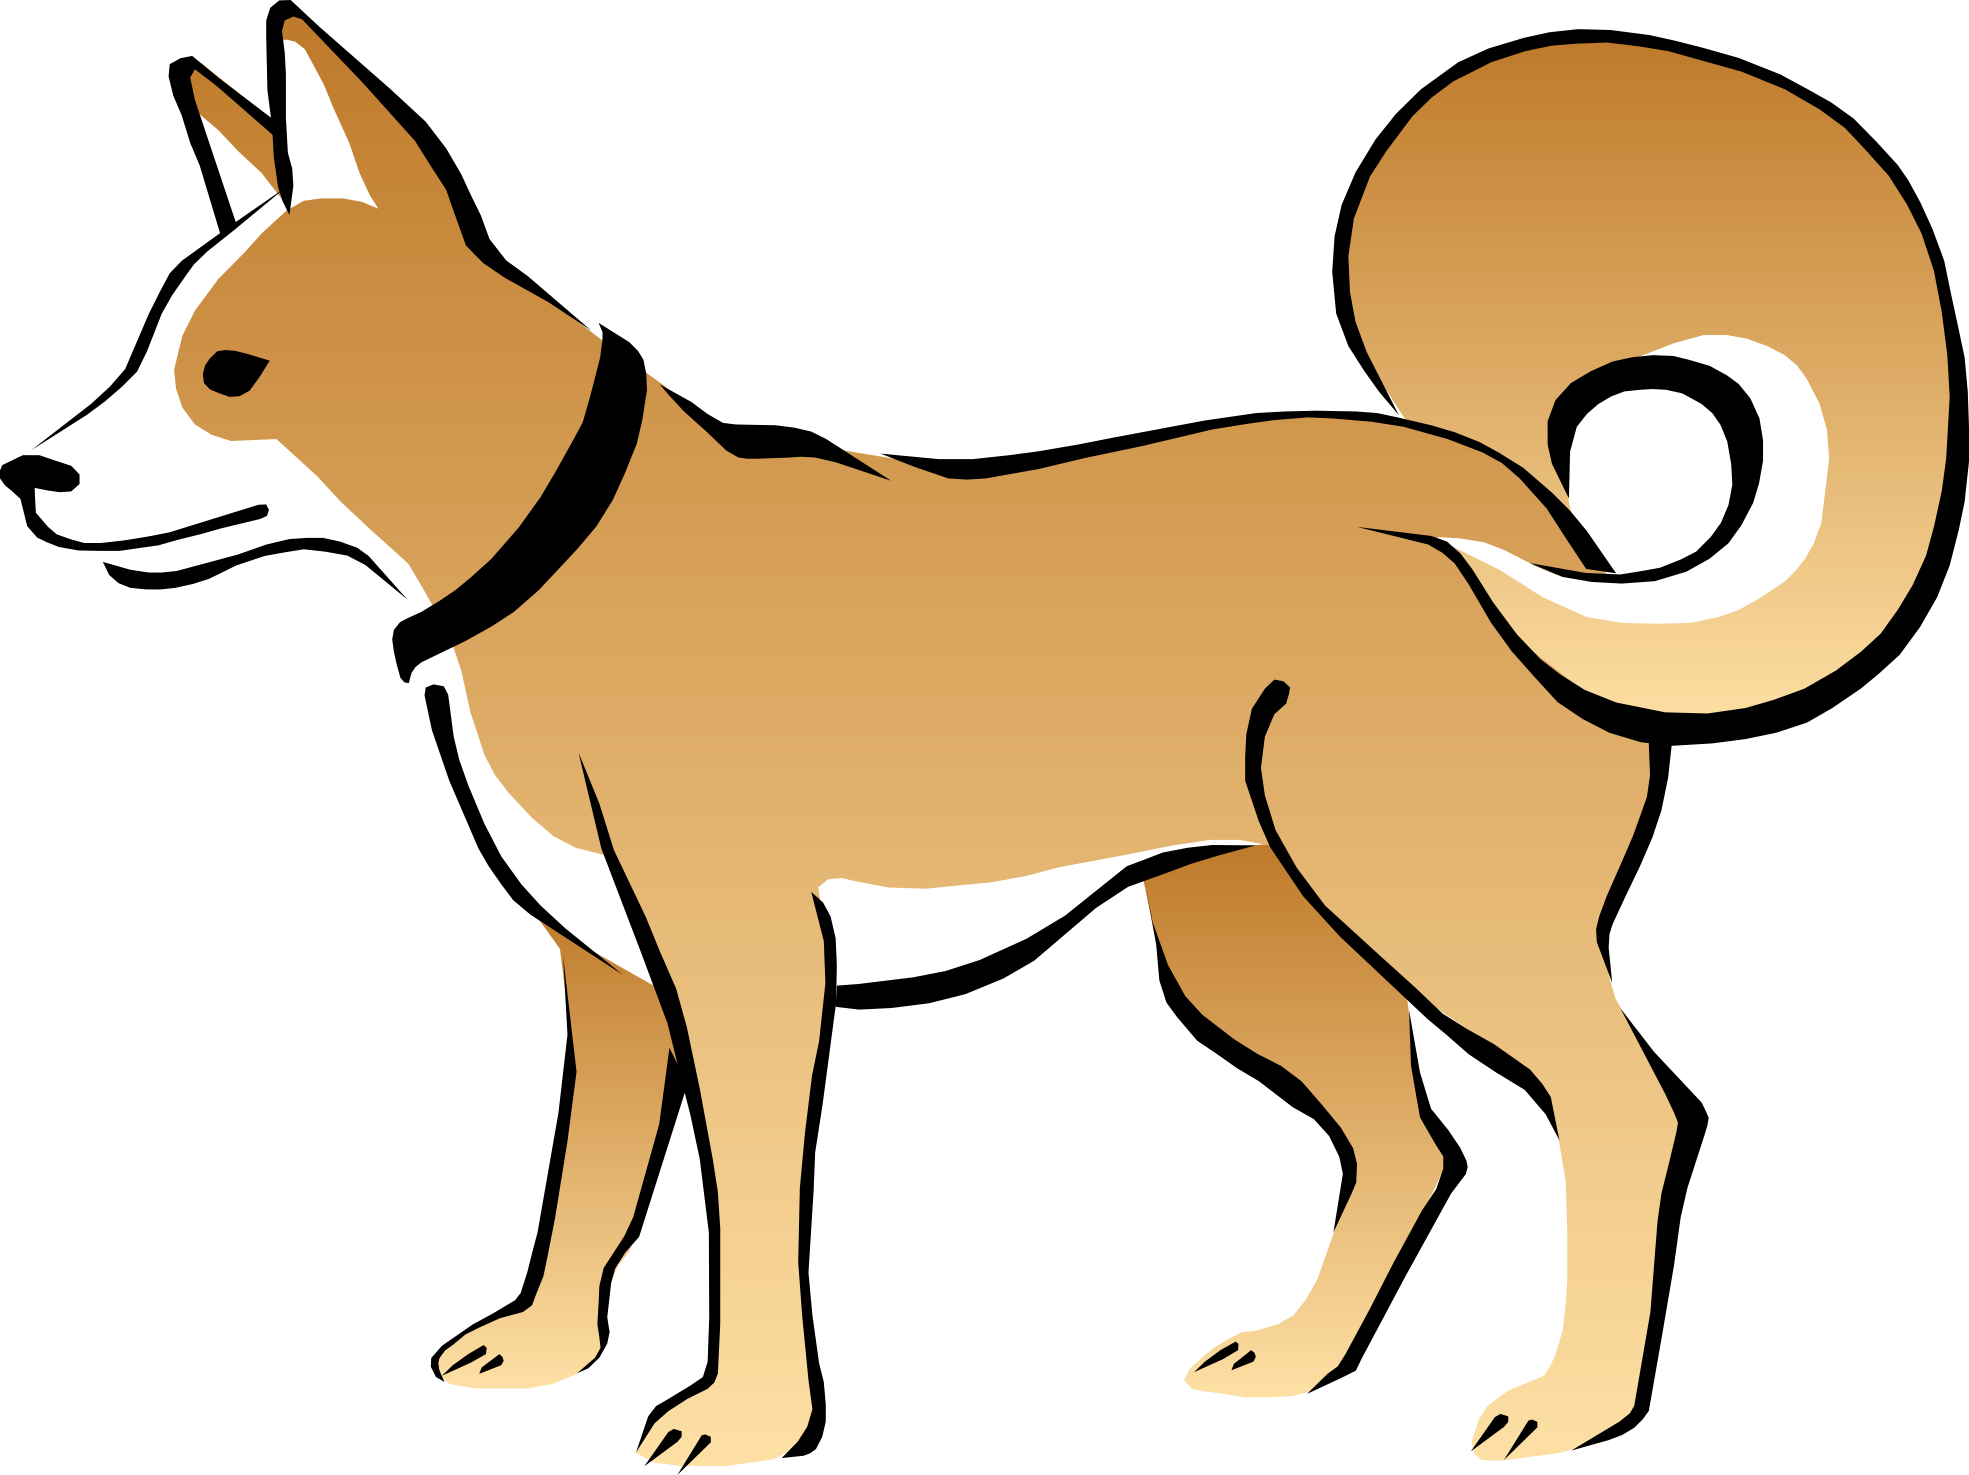 Clip Art Dogs And Cats | Clipart Panda - Free Clipart Images